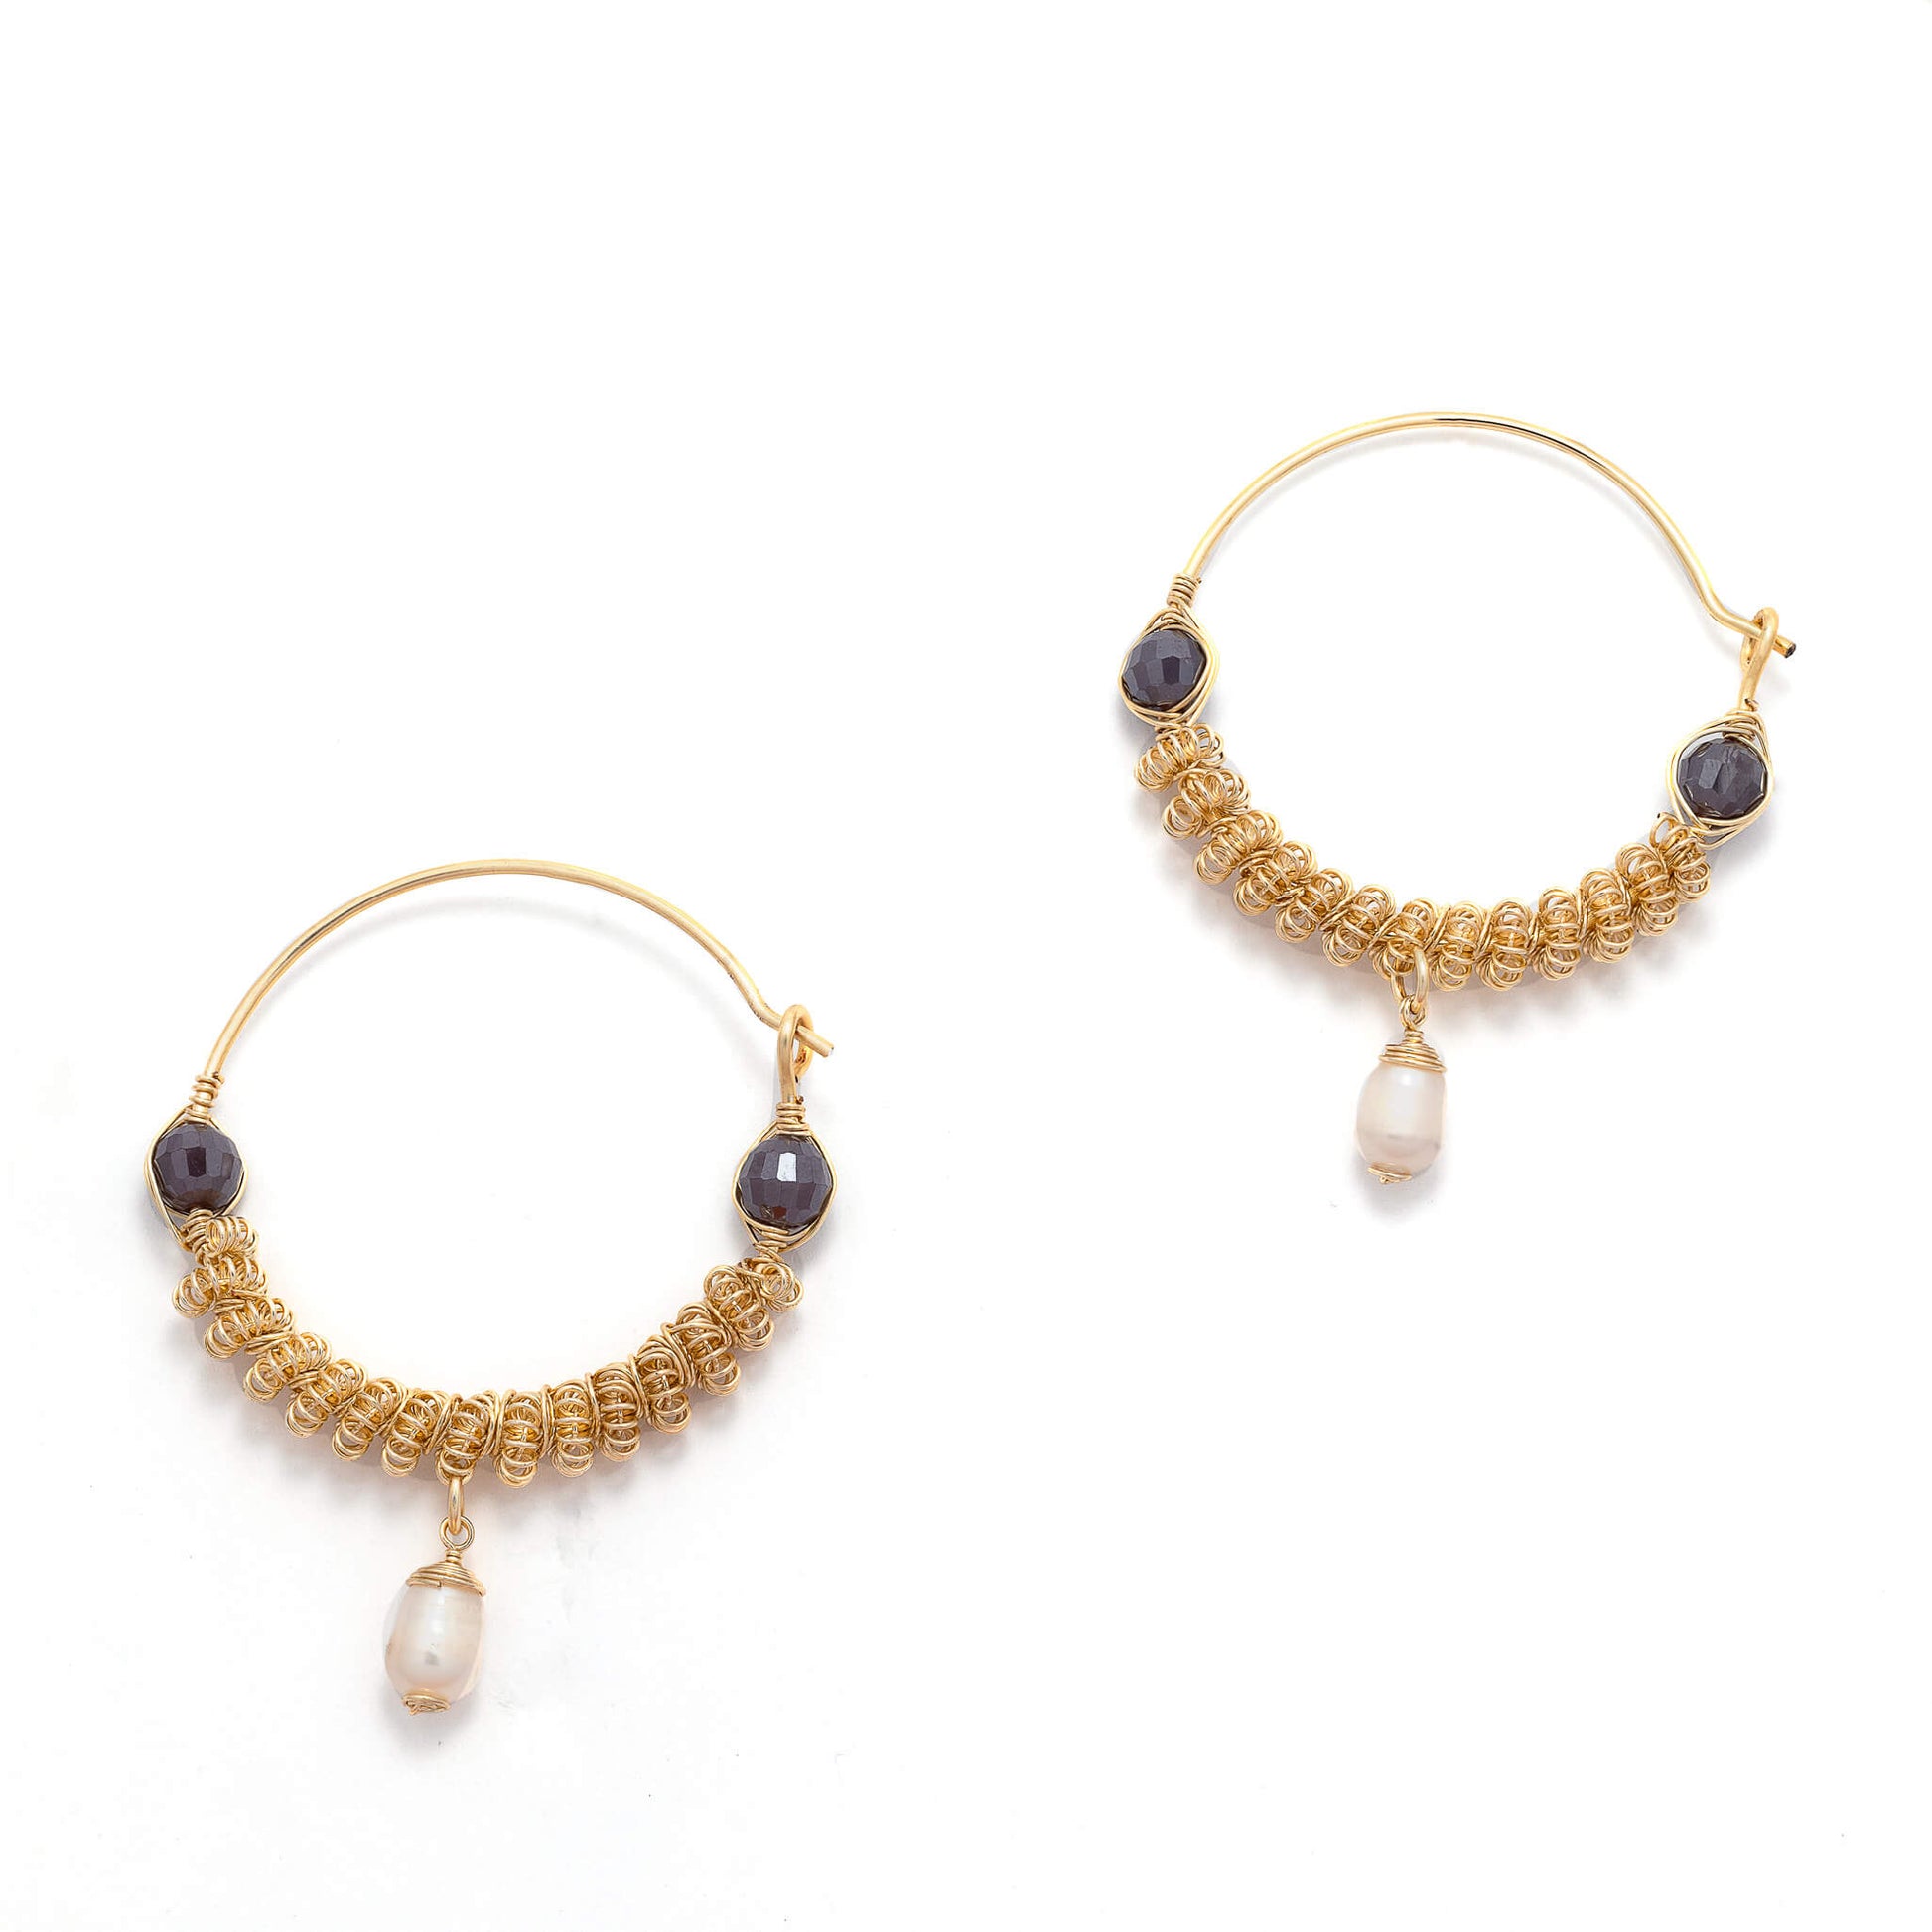 Anzio Hoop Earrings are 2 inches long. Gold, White, and Purple hoops. Handmade with non-tarnish wire, Crystal Beads, and freshwater Pearl. Round Wire Earrings.